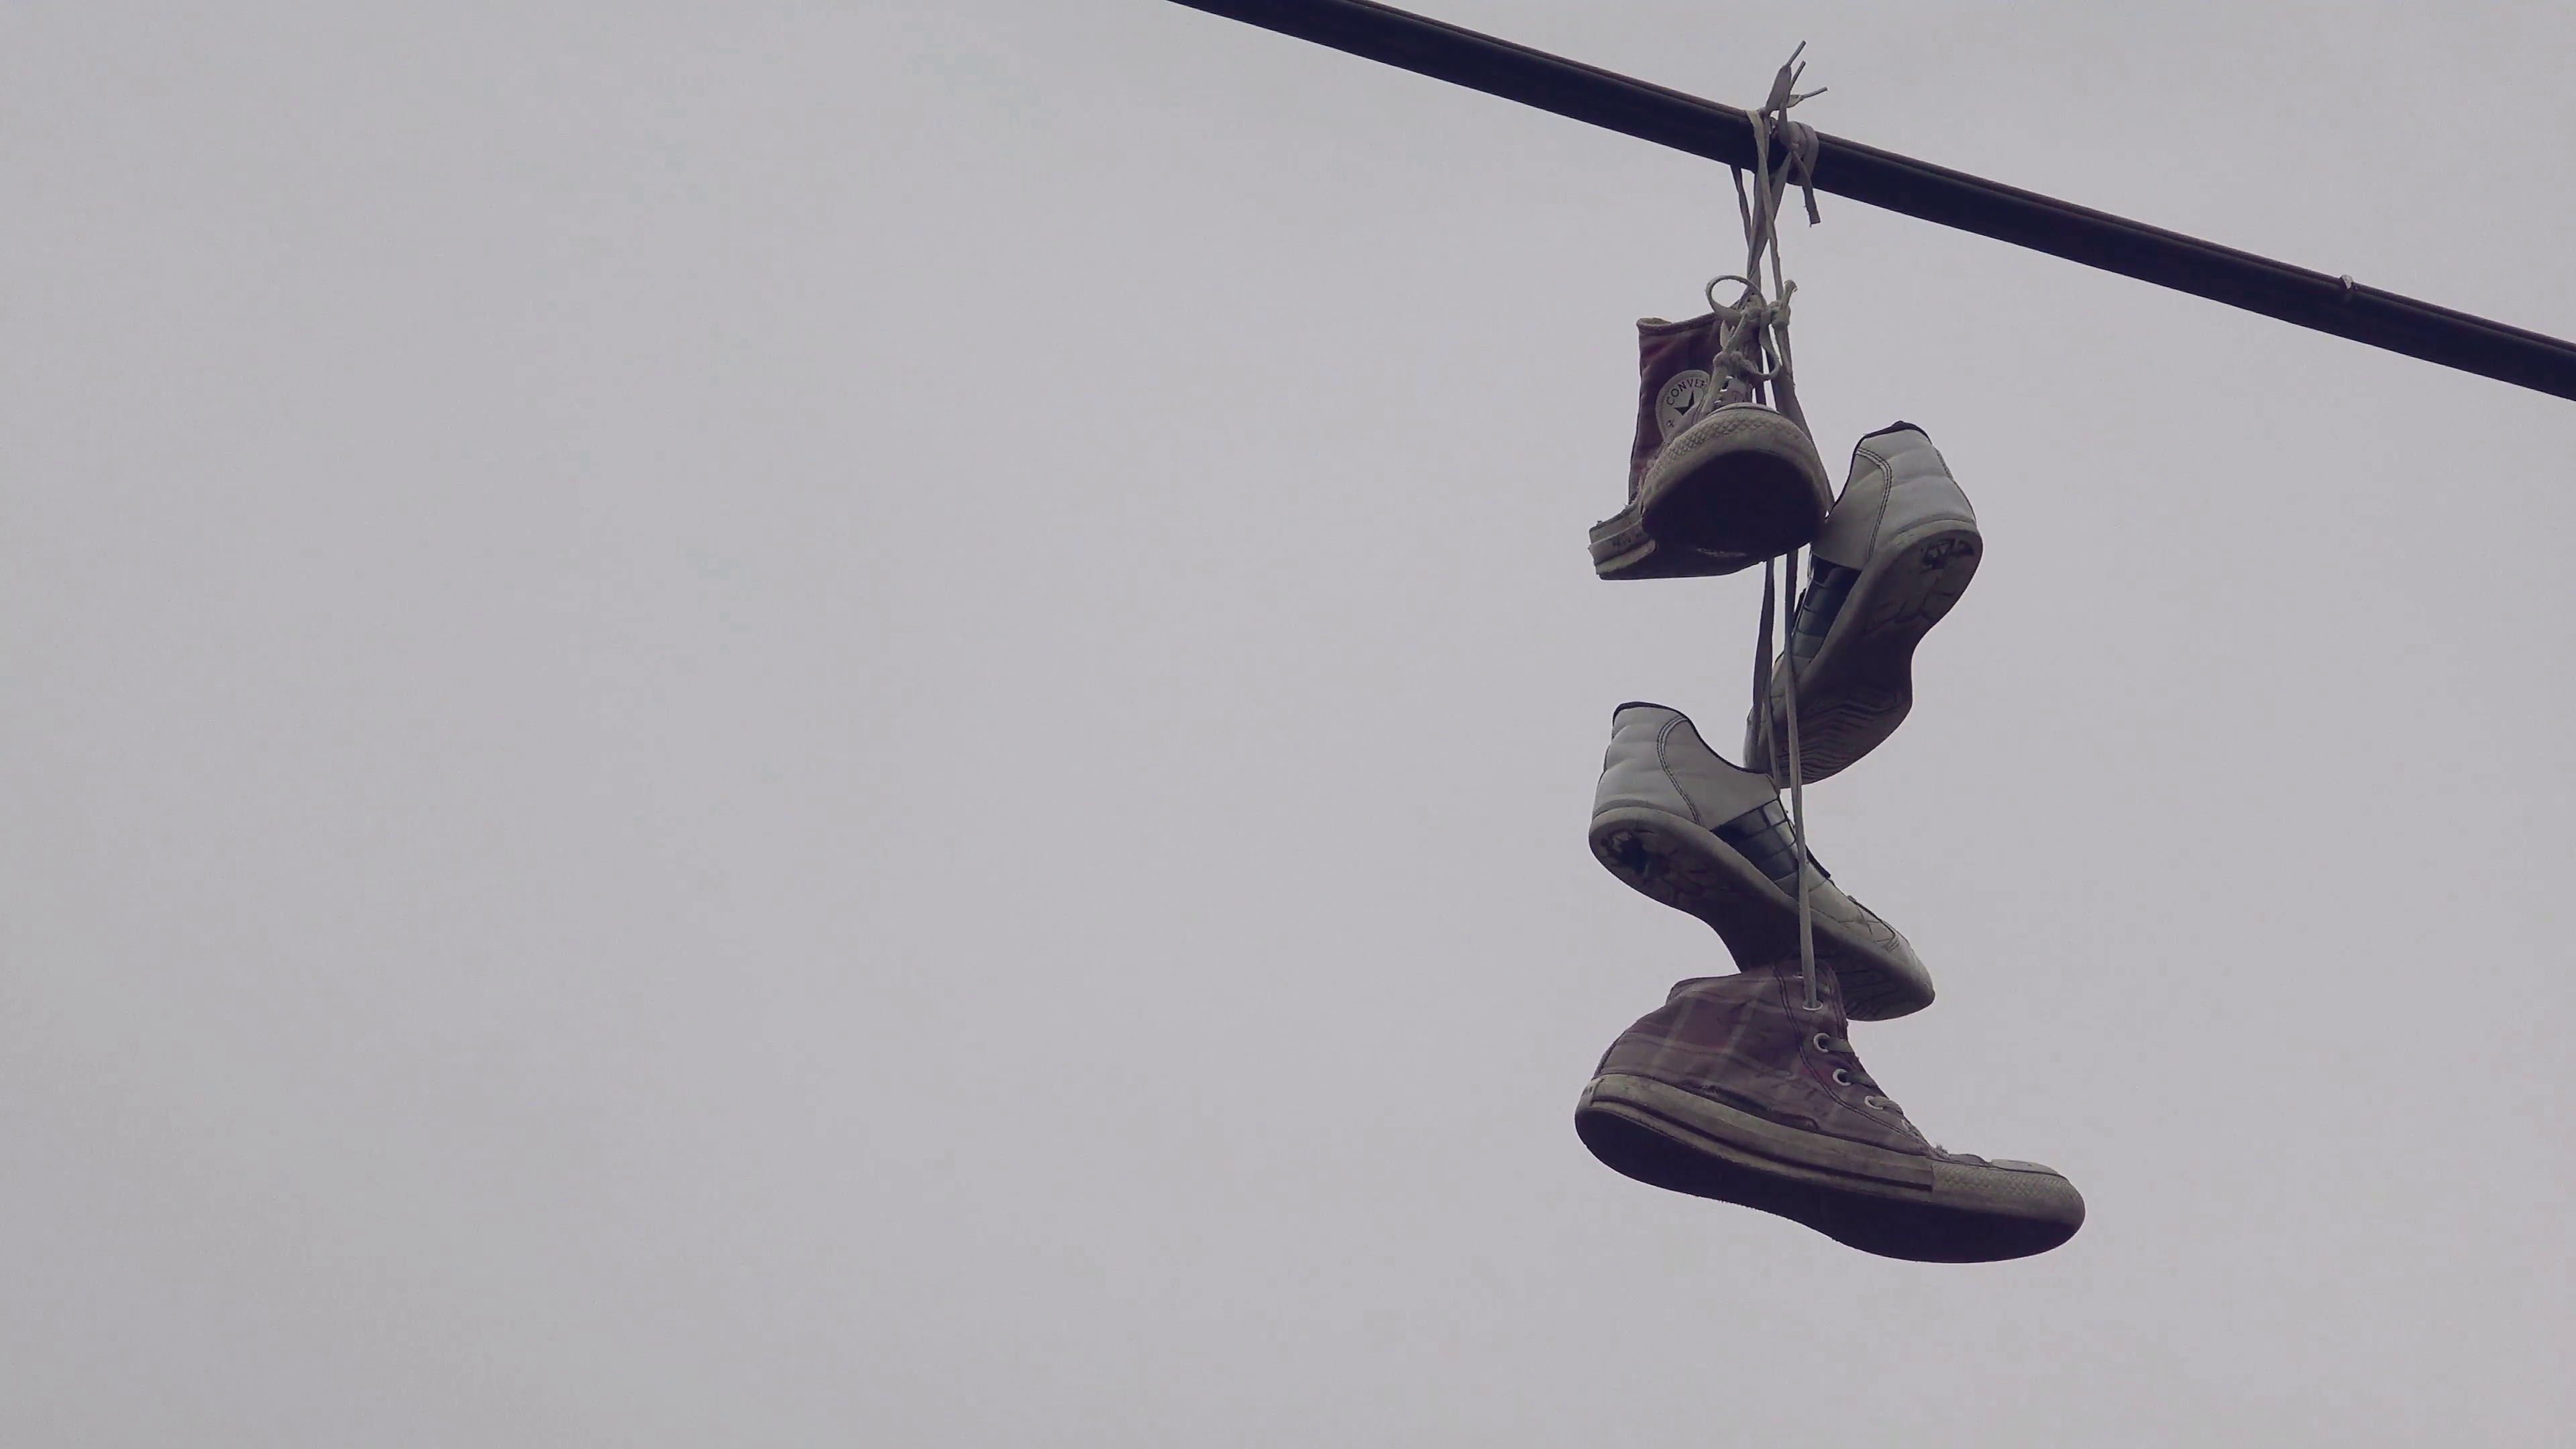 Shoe Tossing, Old Sneakers Hanging on Power Line Wire, Urban Scenery ...